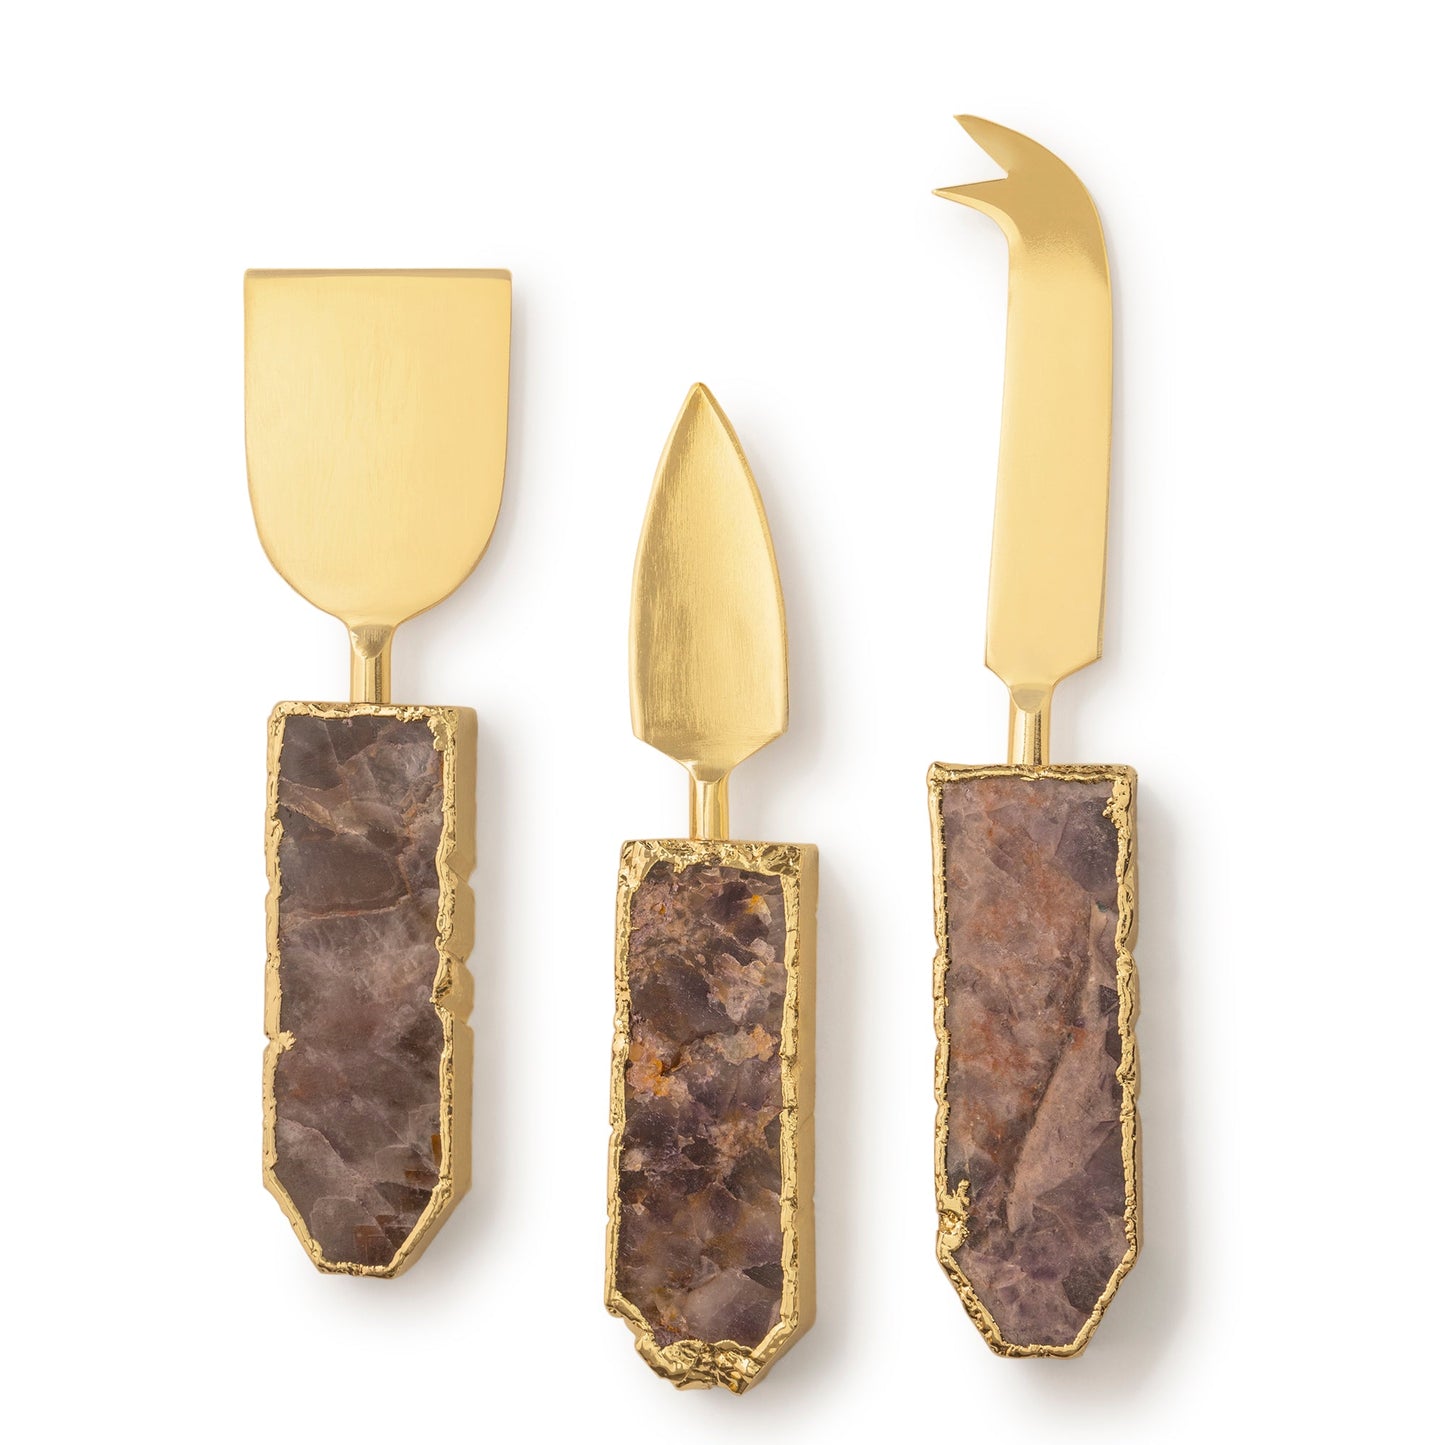 Amethyst Cheese Knives, Set of 3